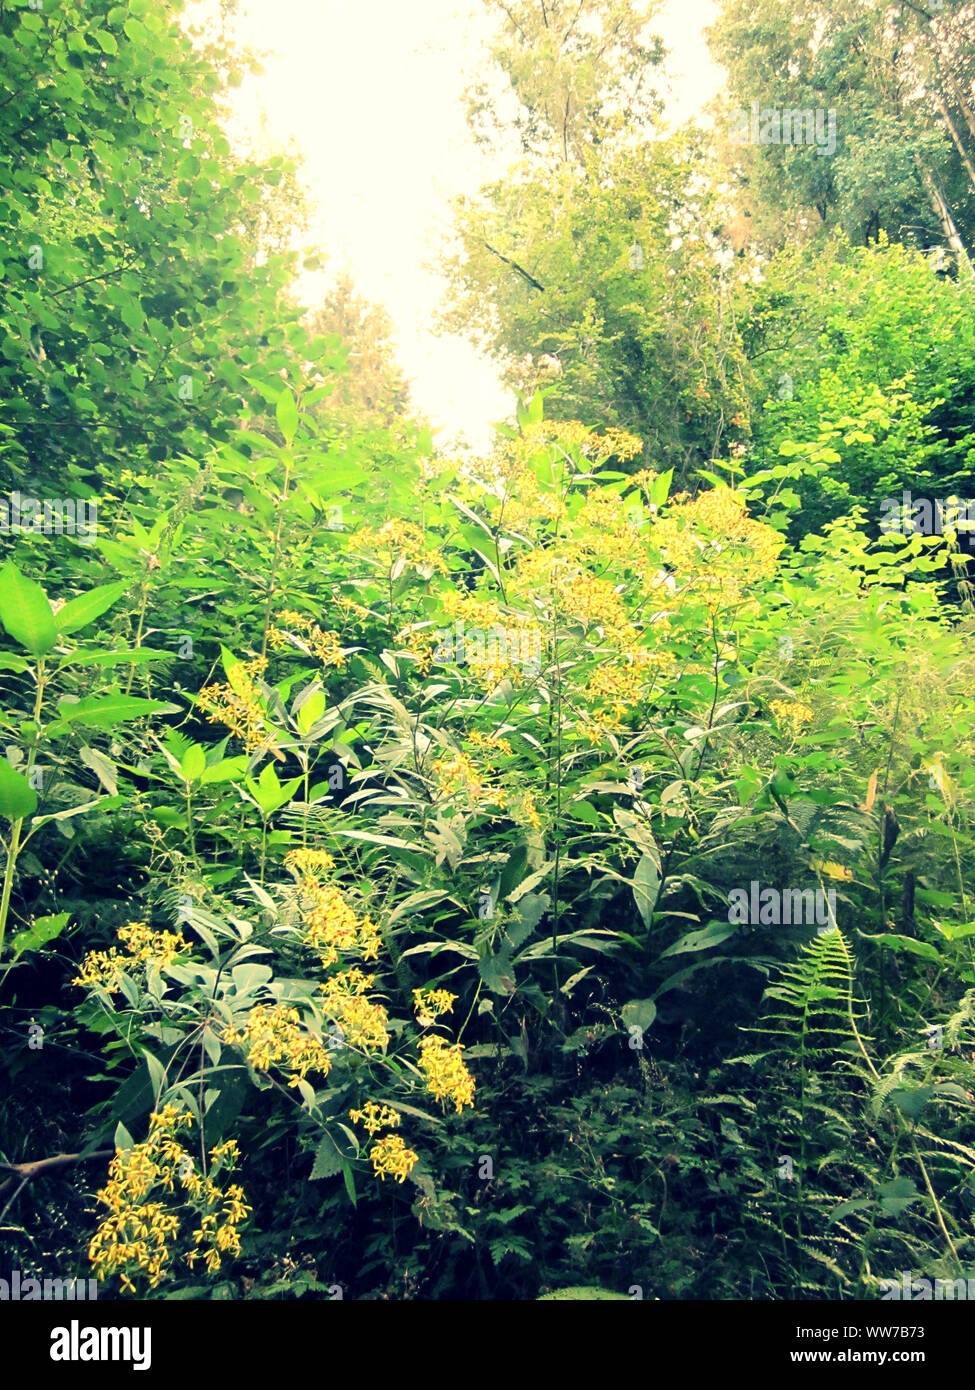 Deciduous forest, wild flowers and shrubs Stock Photo